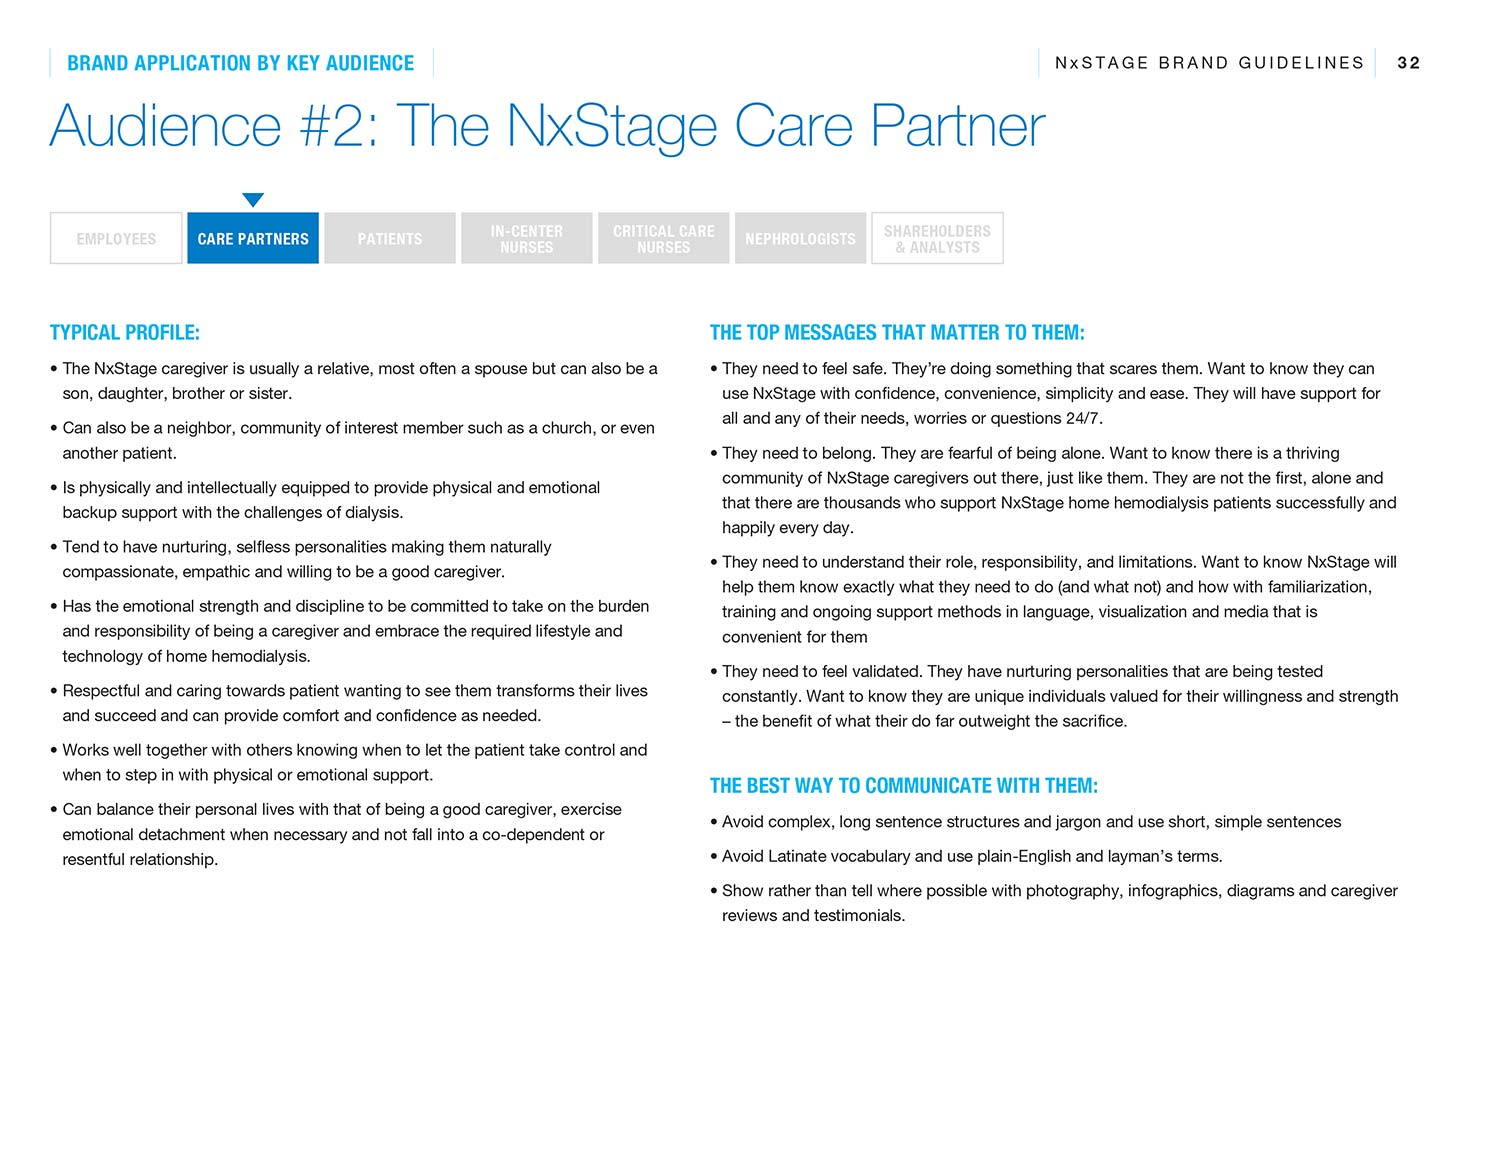 NxStage Brand Guide audience #2: The NxStage Care Partner